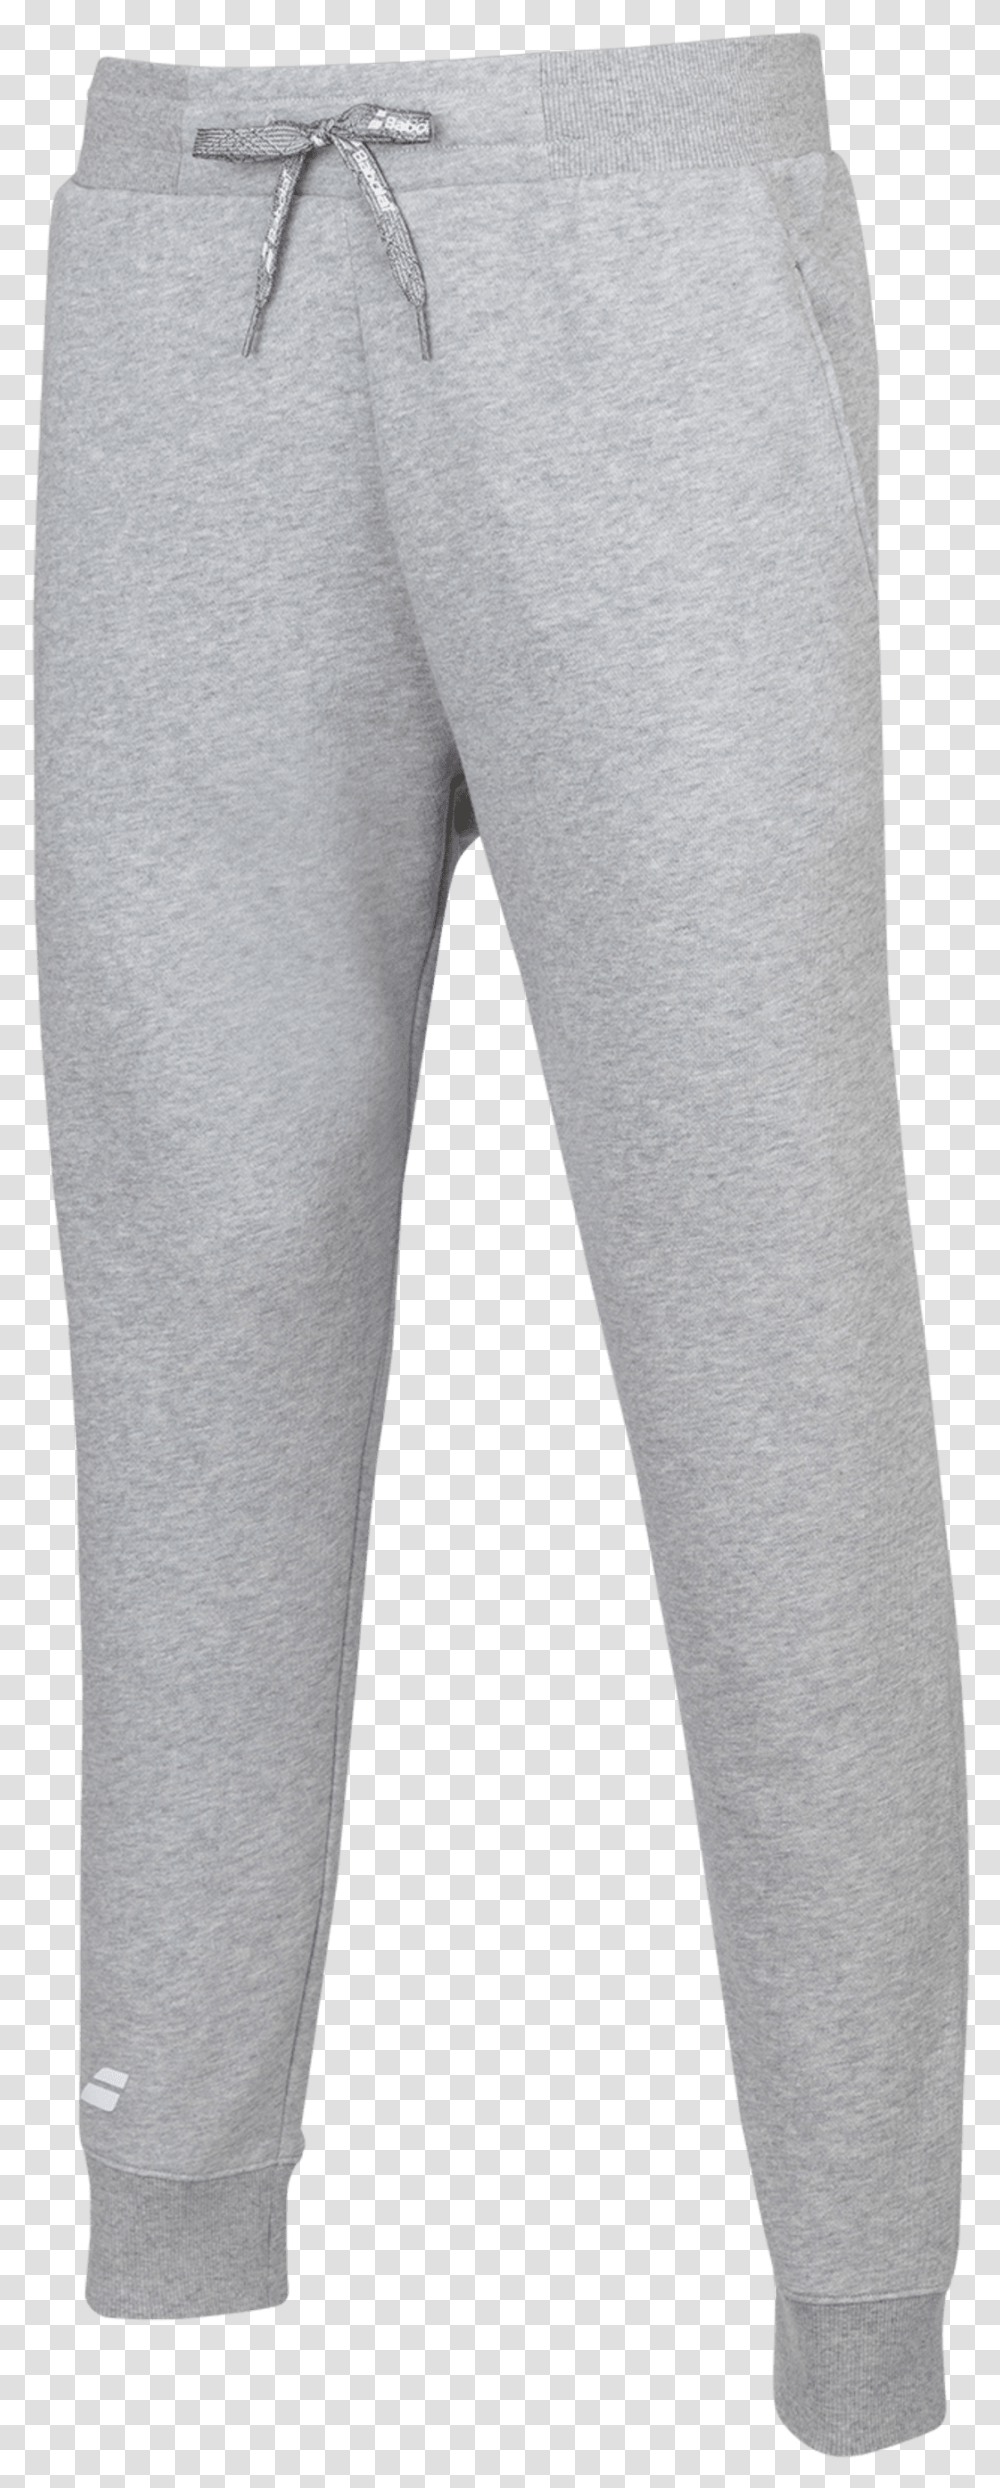 Exercise Jogger Pant Sweatpants, Clothing, Jeans, Tights, Shirt Transparent Png